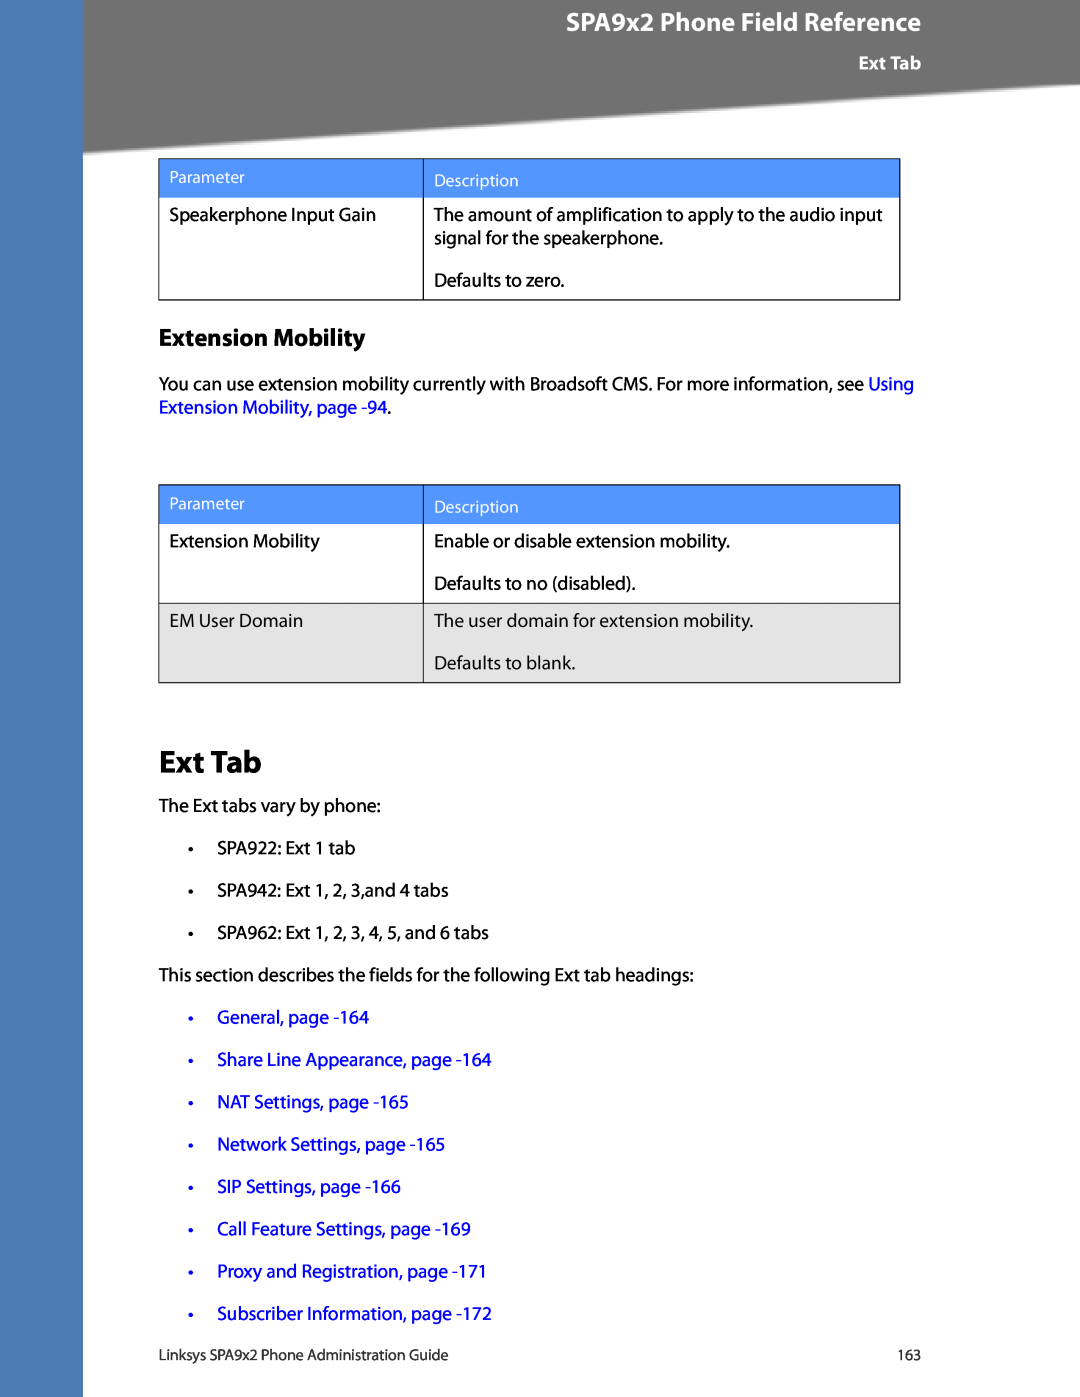 Linksys SPA932, SPA962, SPA942 Ext Tab, Extension Mobility, General, page Share Line Appearance, page NAT Settings, page 